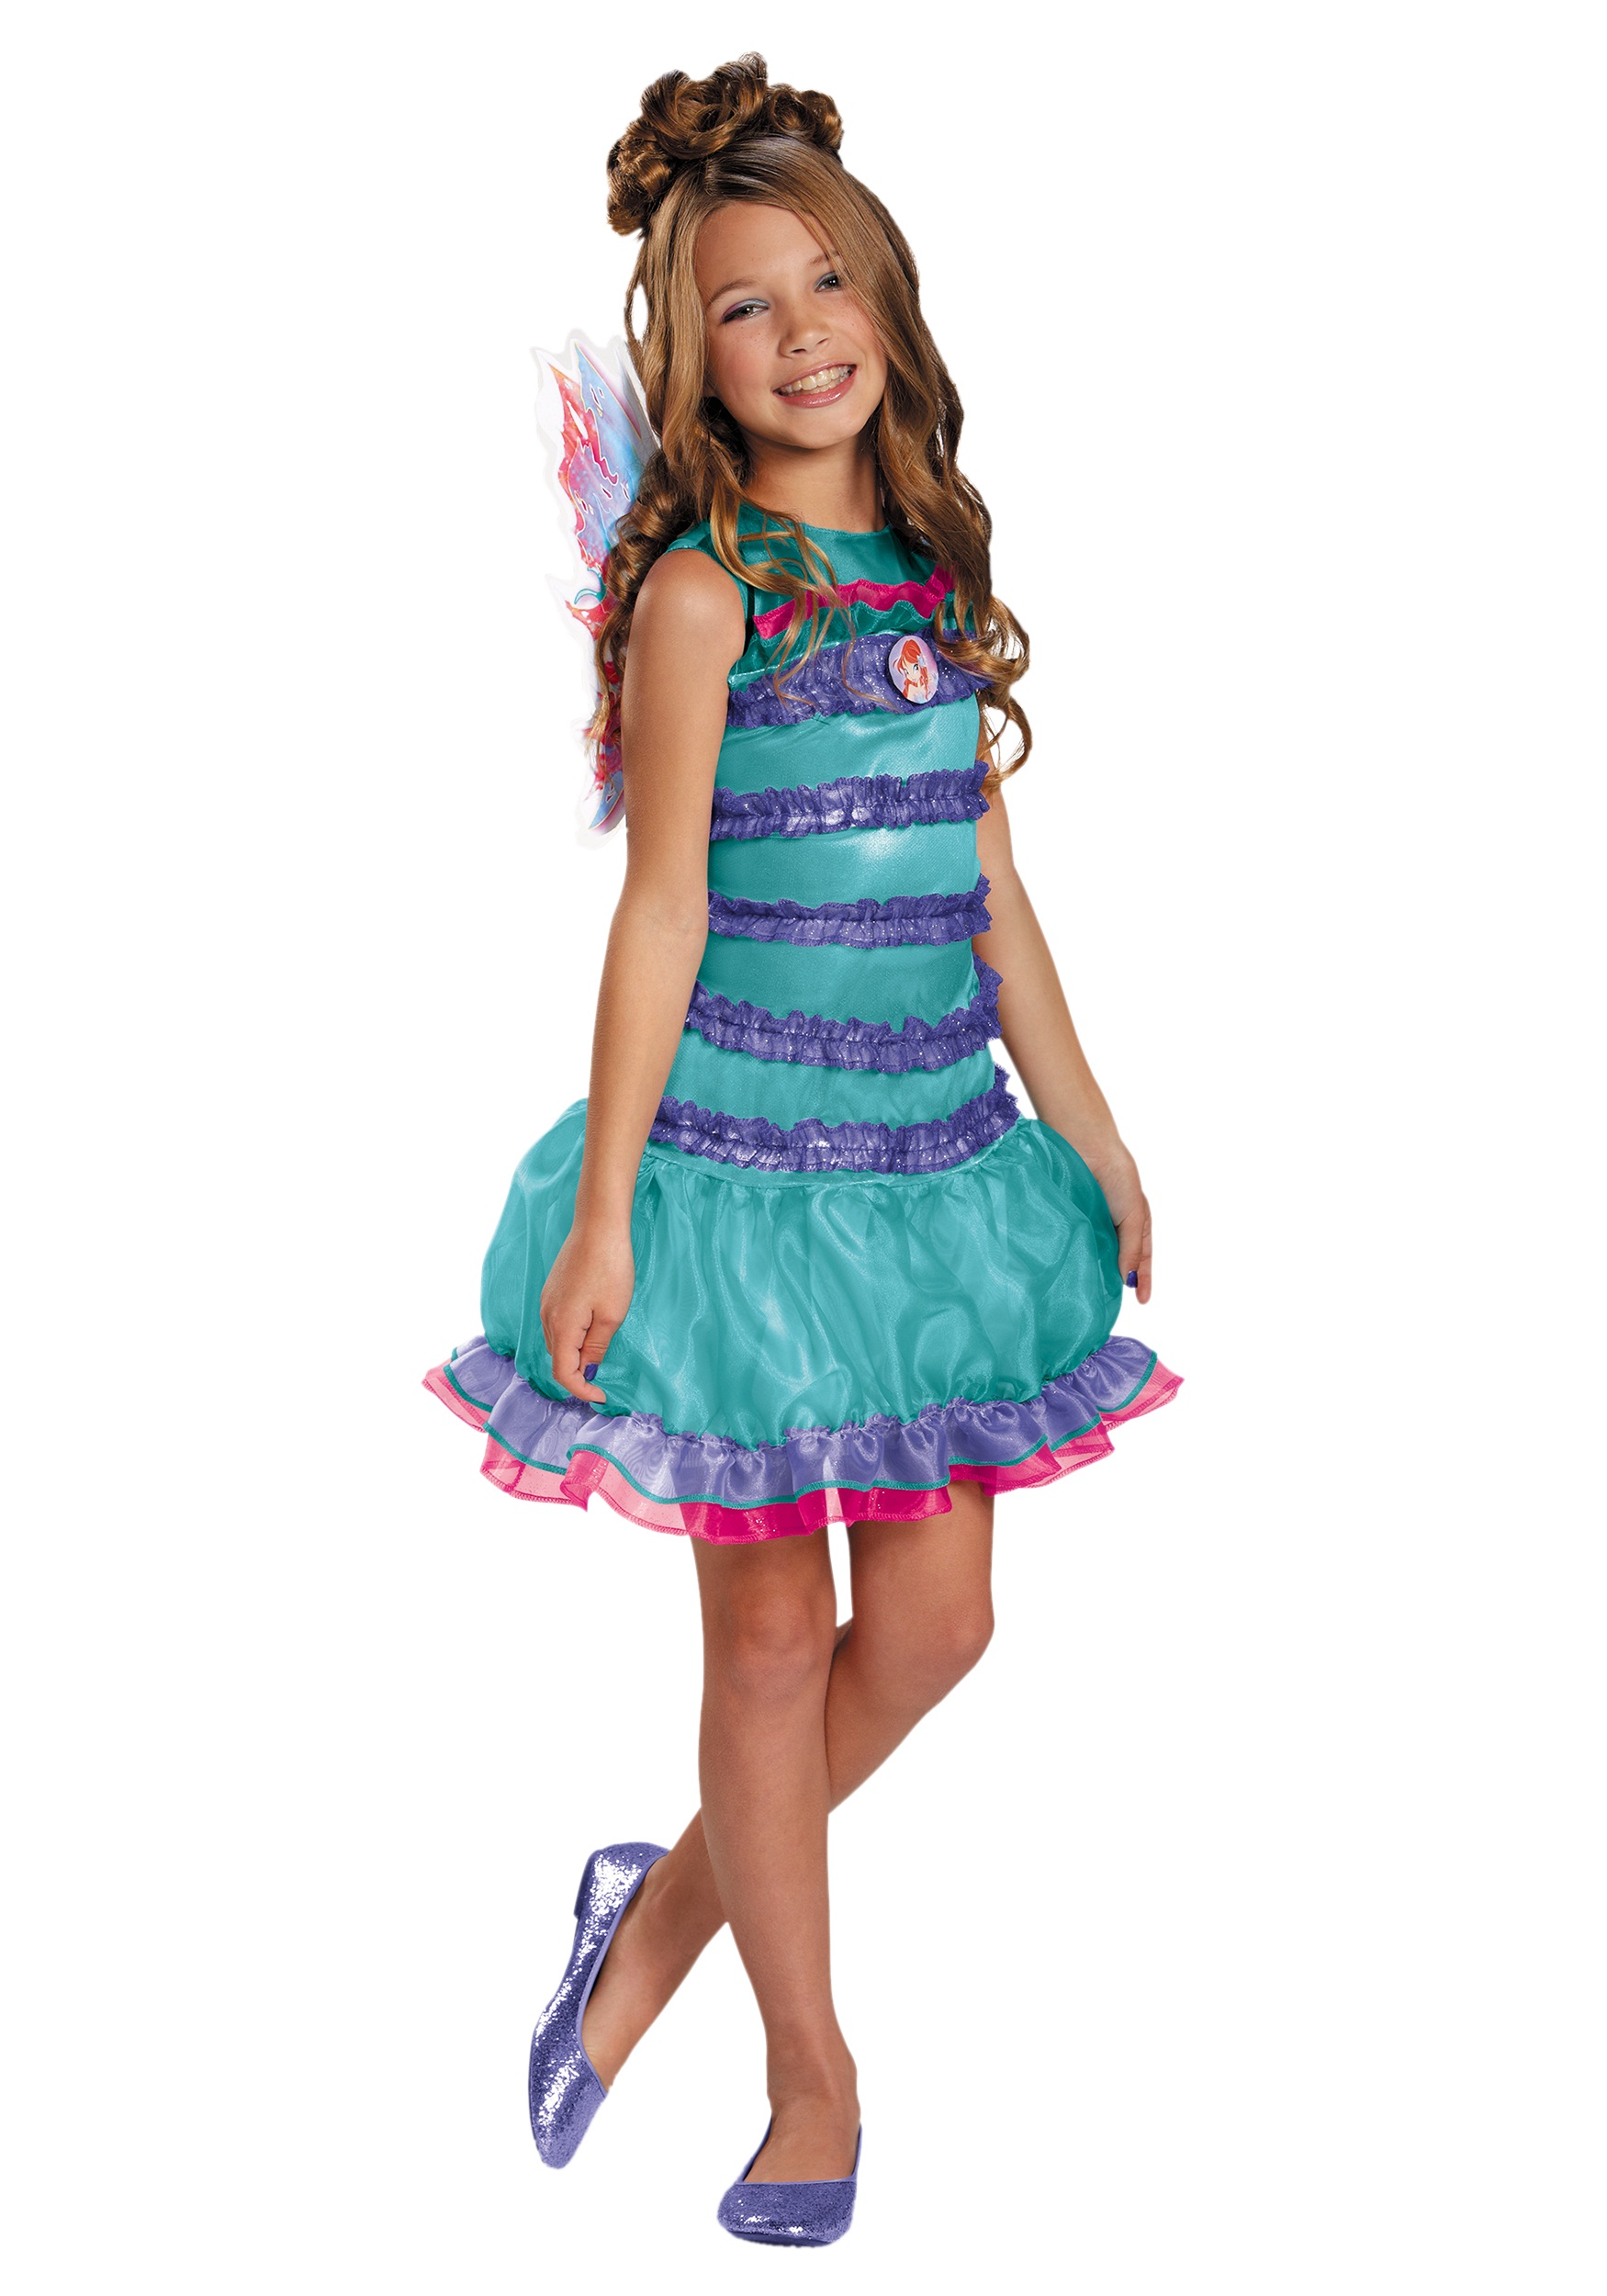 Bloom Costume with Free Shipping in U.S., UK, Europe, Canada | Order Child Winx...